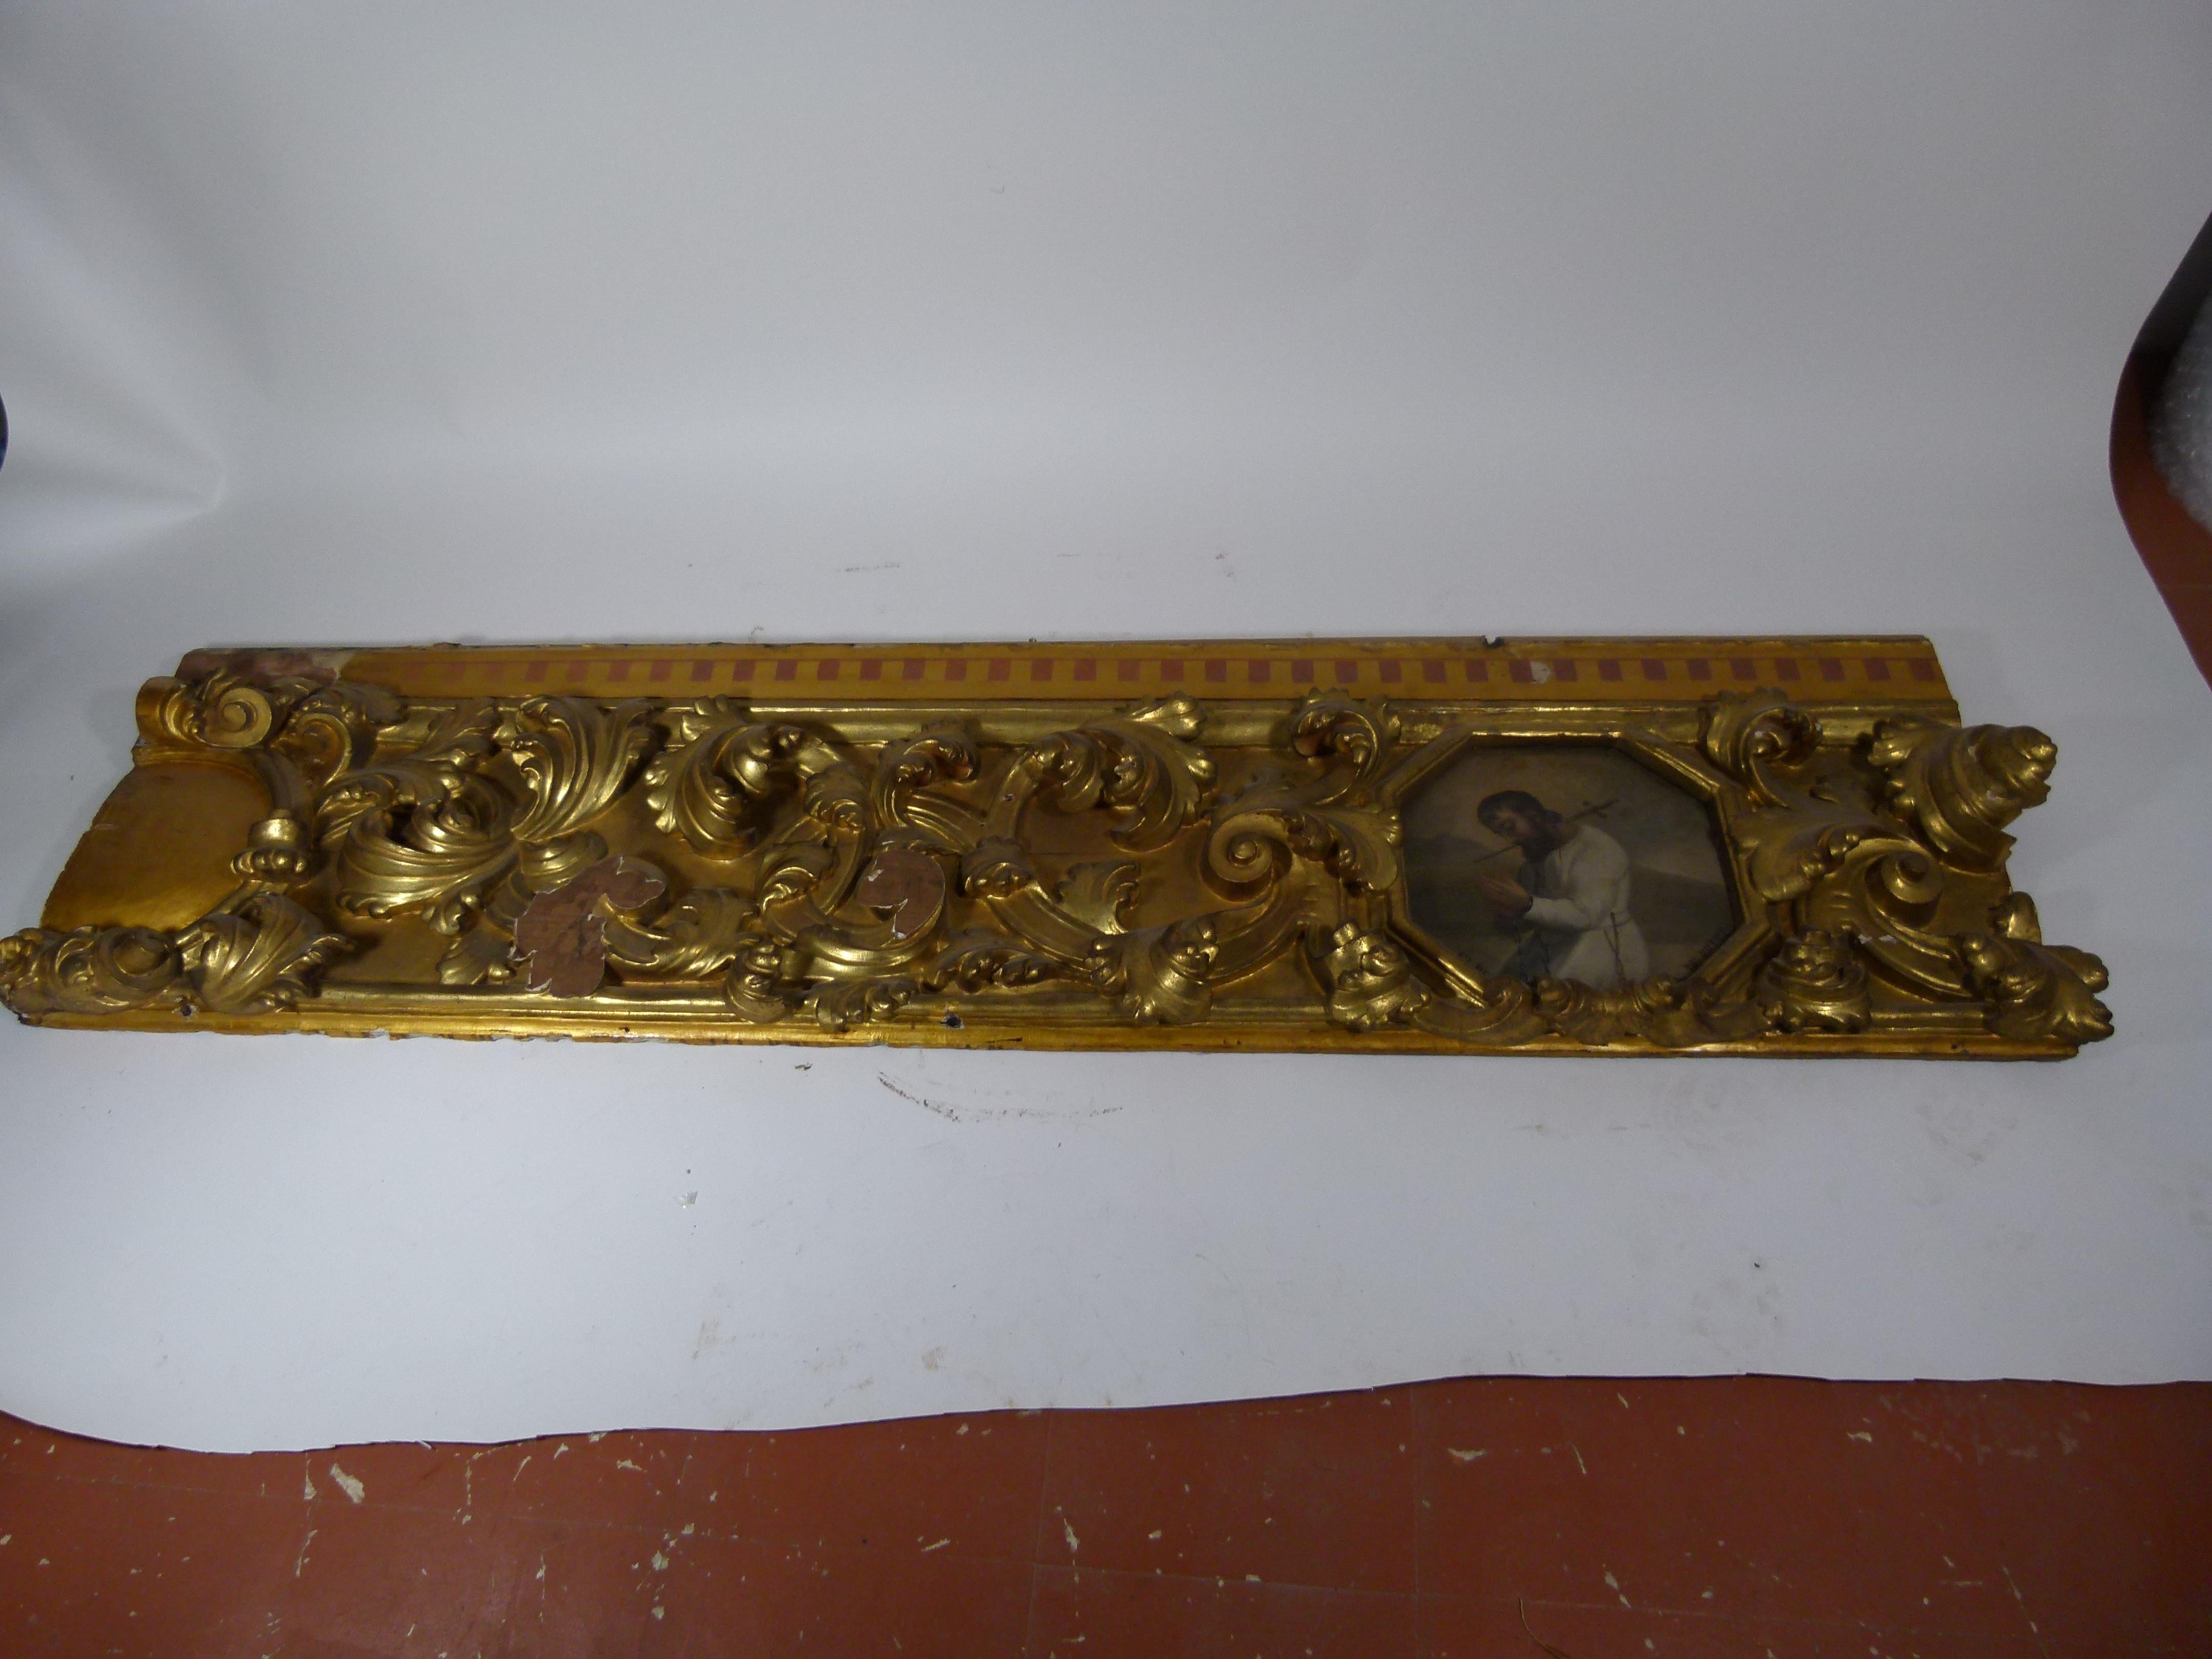 Excellent Polychromed golden wood frieze fragment from Azpeitia, Spain.
In the center there is a painting on canvas by Juan de Britto.

This freeze was removed  after the Vatican's Council II. Pope John XXIII recommended to remove opulent ornaments